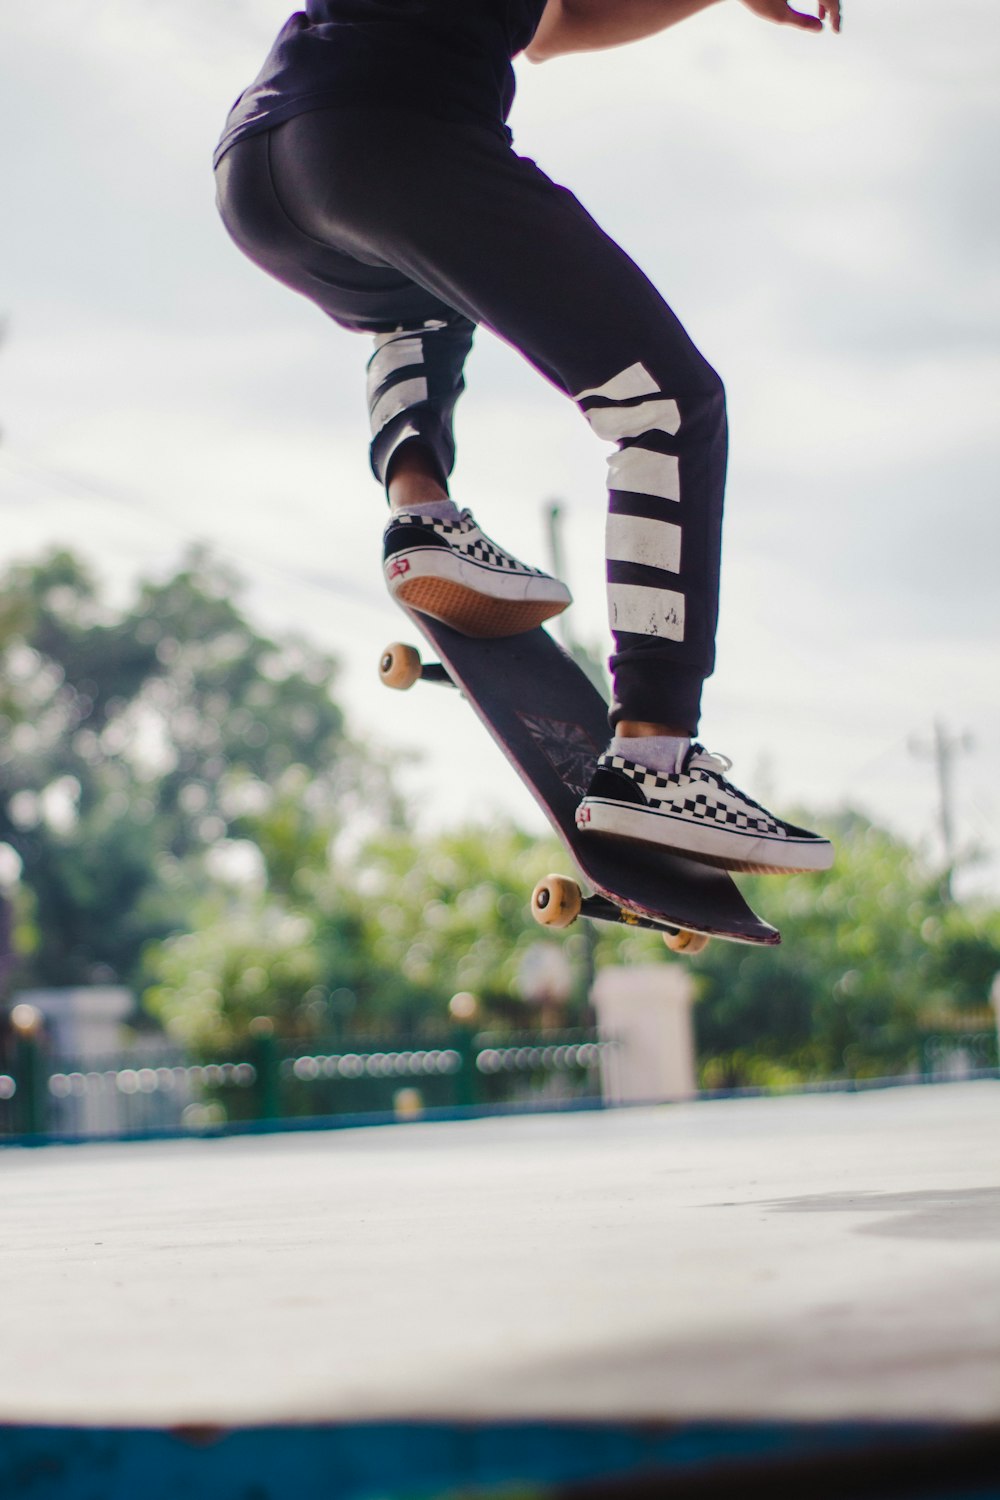 Person in black pants and black and white nike sneakers jumping on  skateboard during daytime photo – Free Skateboard Image on Unsplash